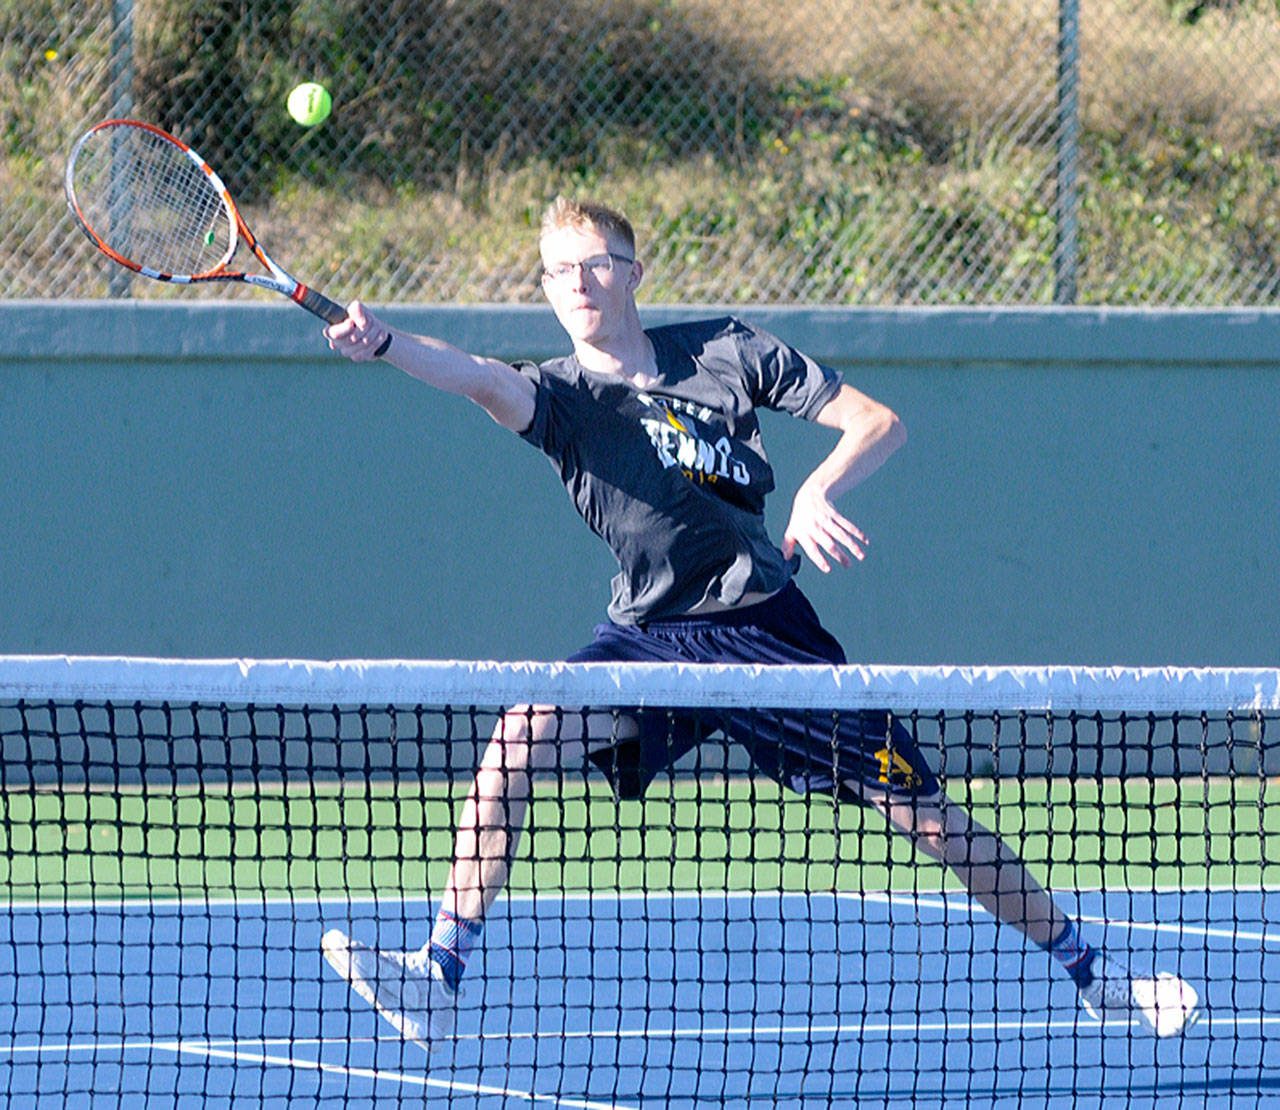 Aberden’s Cody Sayers reaches out for a shot in a doubles mach against Centralia at Sam Benn Park on Wednesday. (Hasani Grayson | The Daily World)